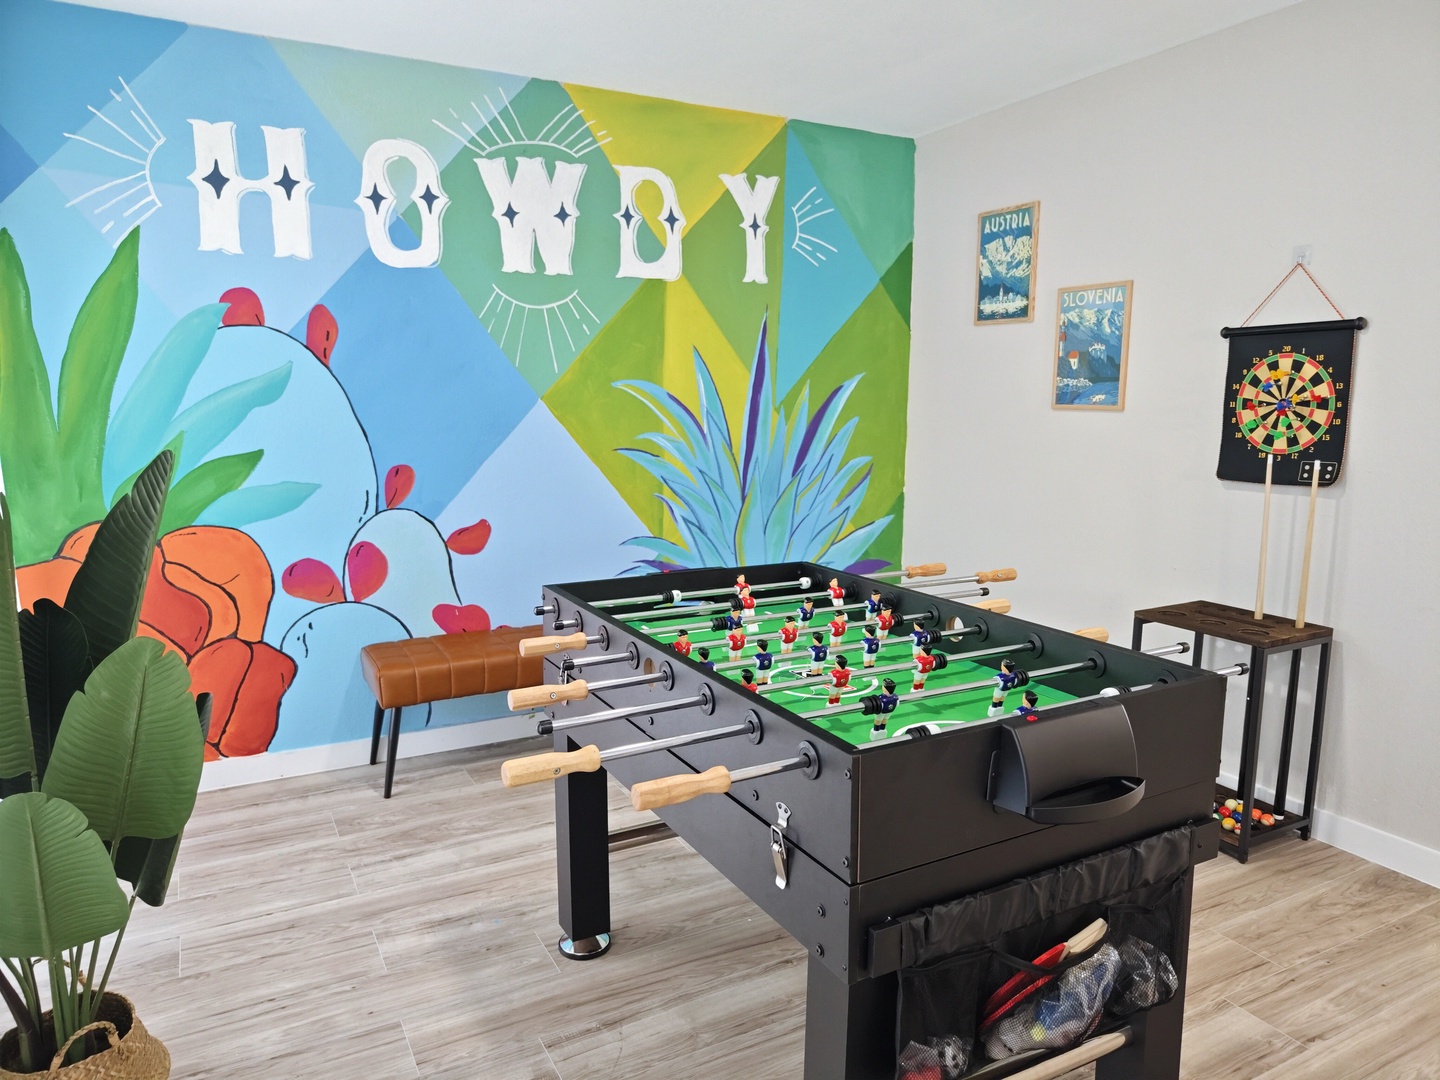 Say, “Howdy!” to your competitive side in the front game room!